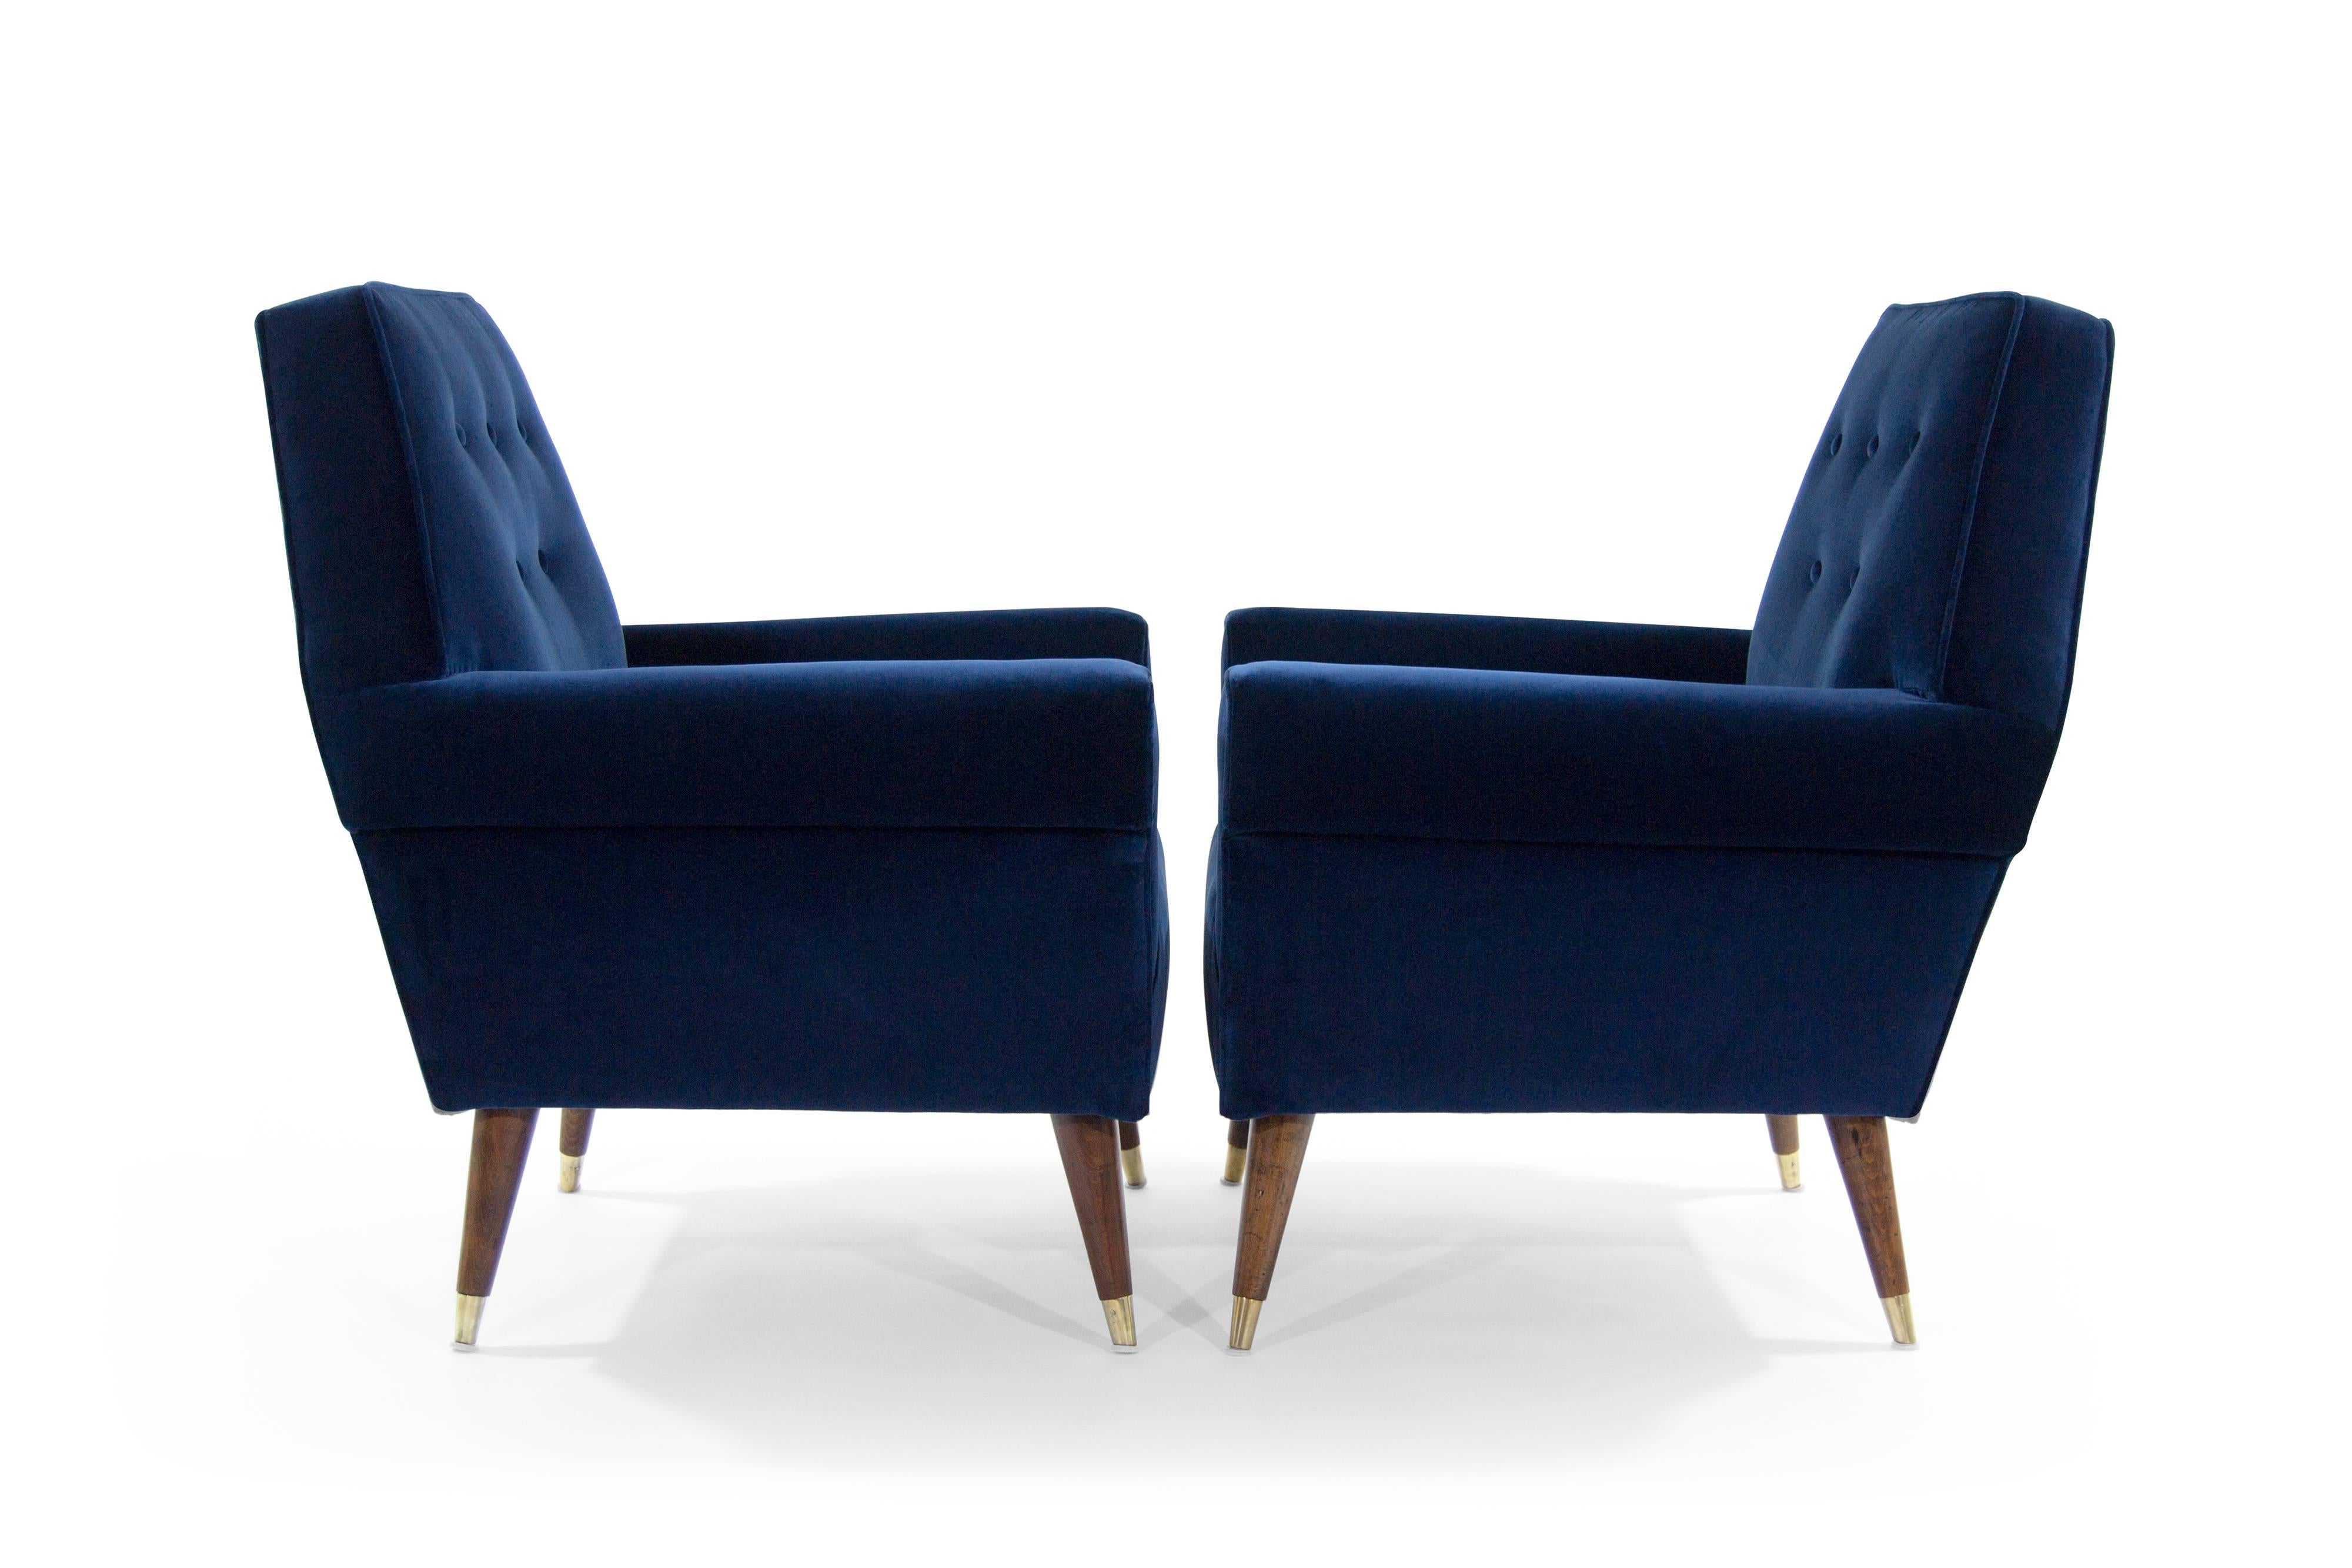 20th Century Italian Navy Blue Velvet Lounge Chairs with Splayed Legs